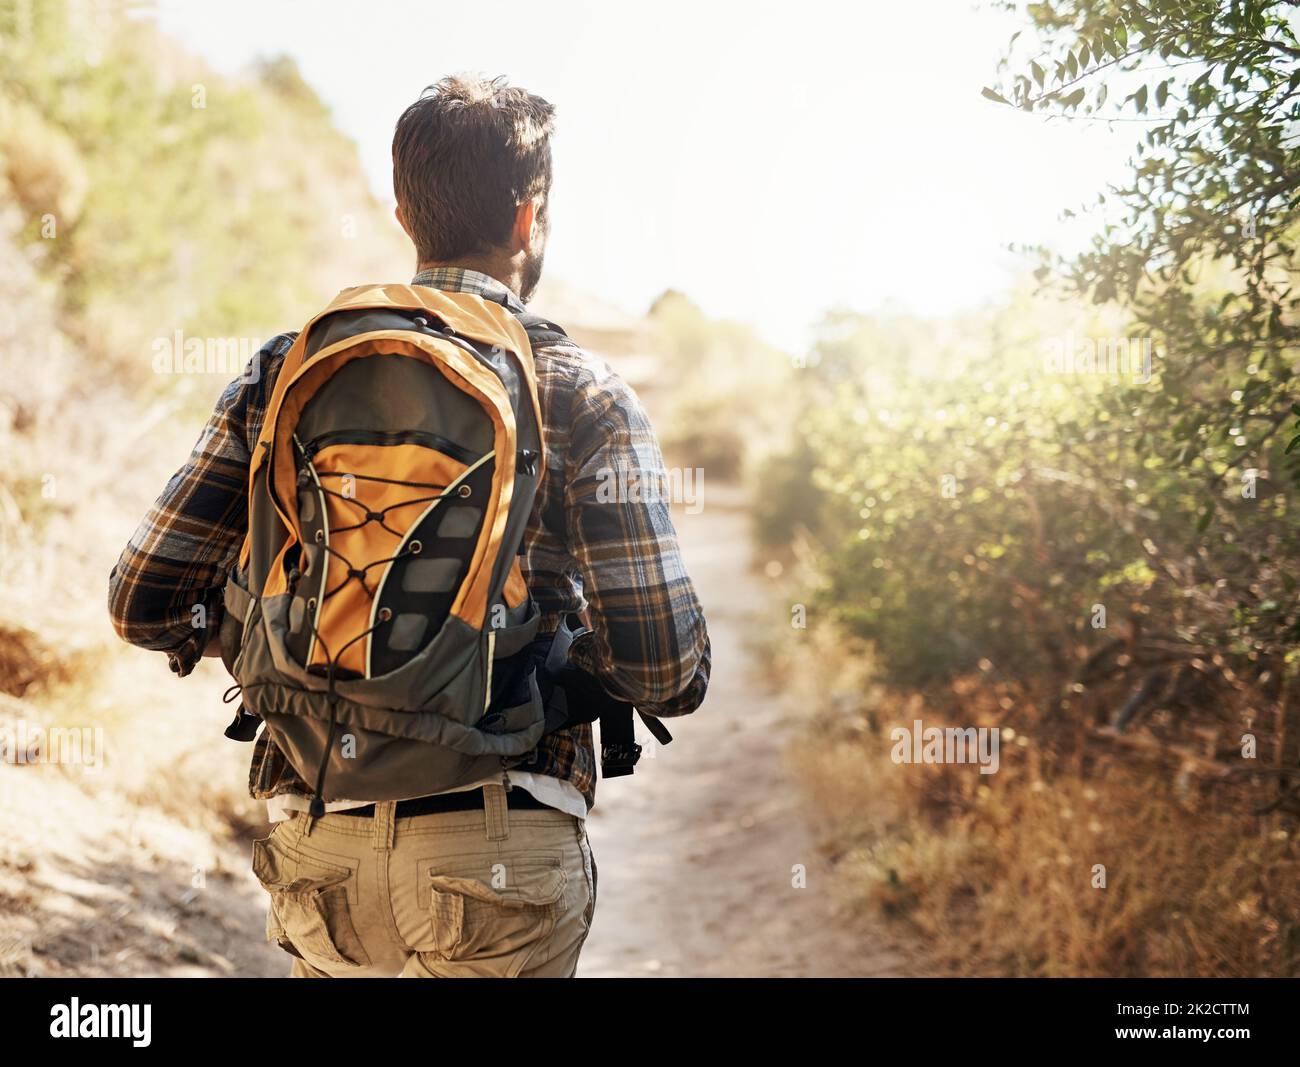 Into the wilderness. Rearview shot of an unrecognizable man hiking in the mountains. Stock Photo